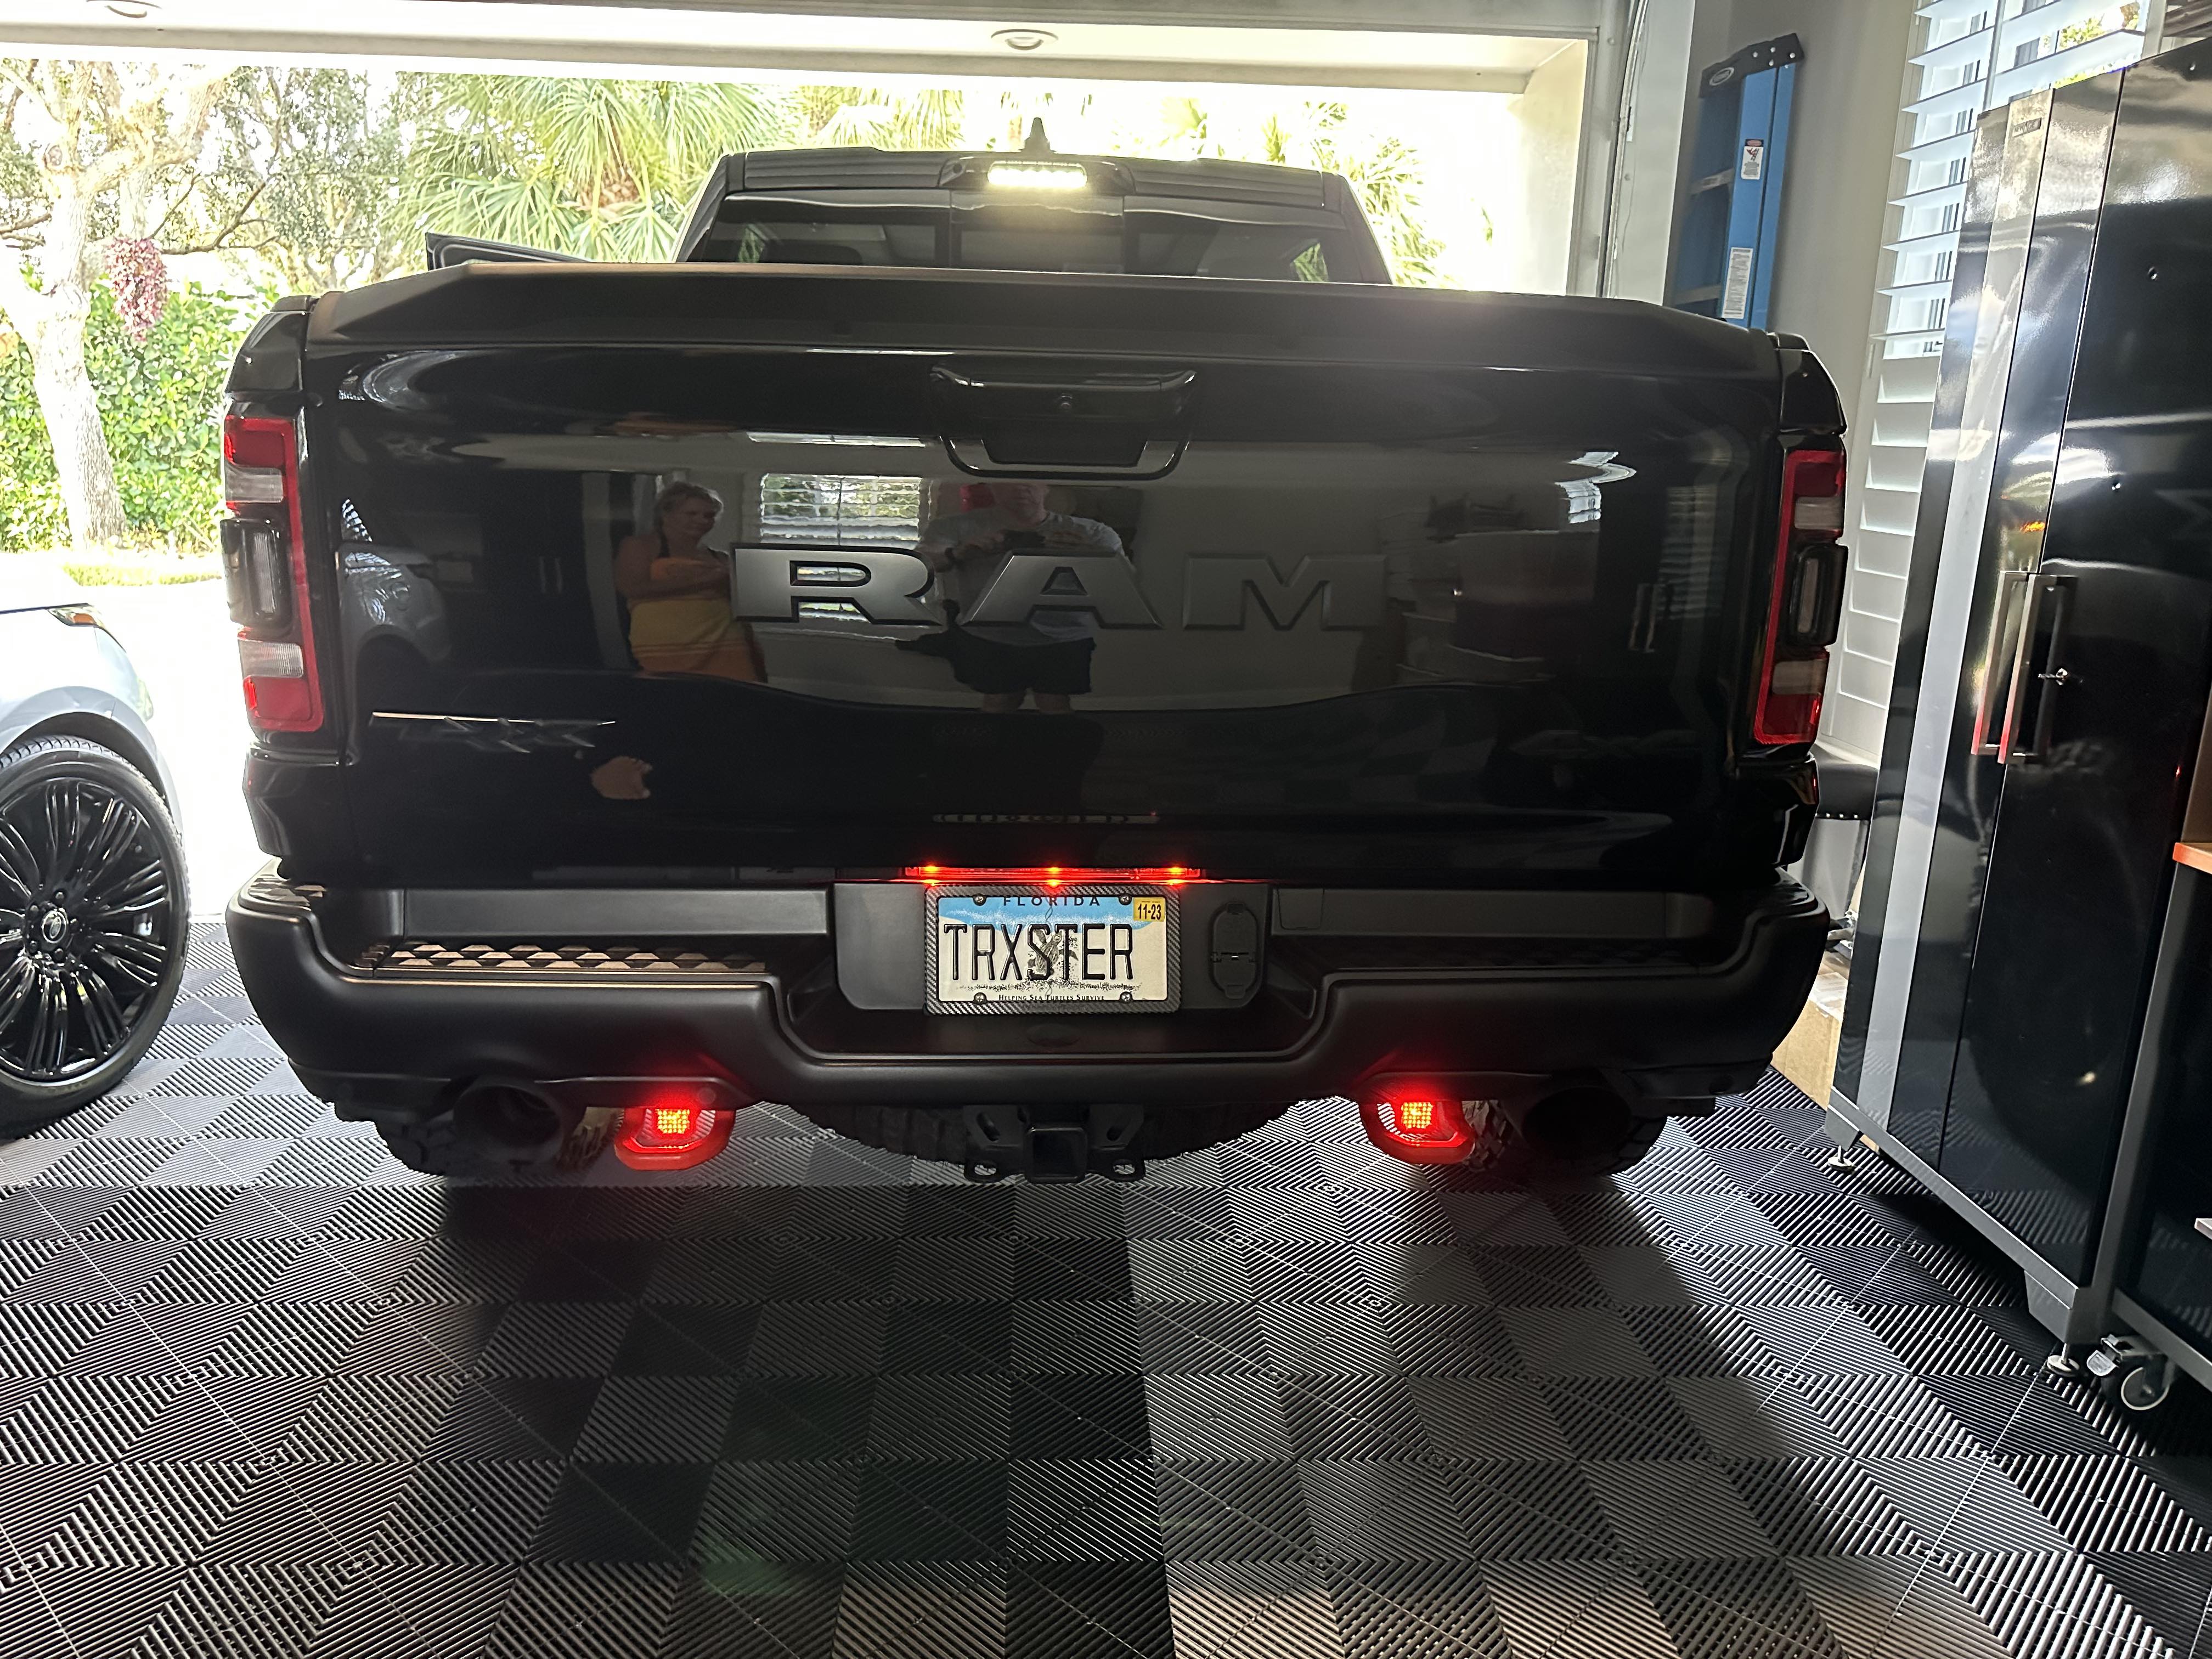 Diode Dynamics Stage Series Reverse Light Kit for 2019-2024 Ram 1500 & TRX